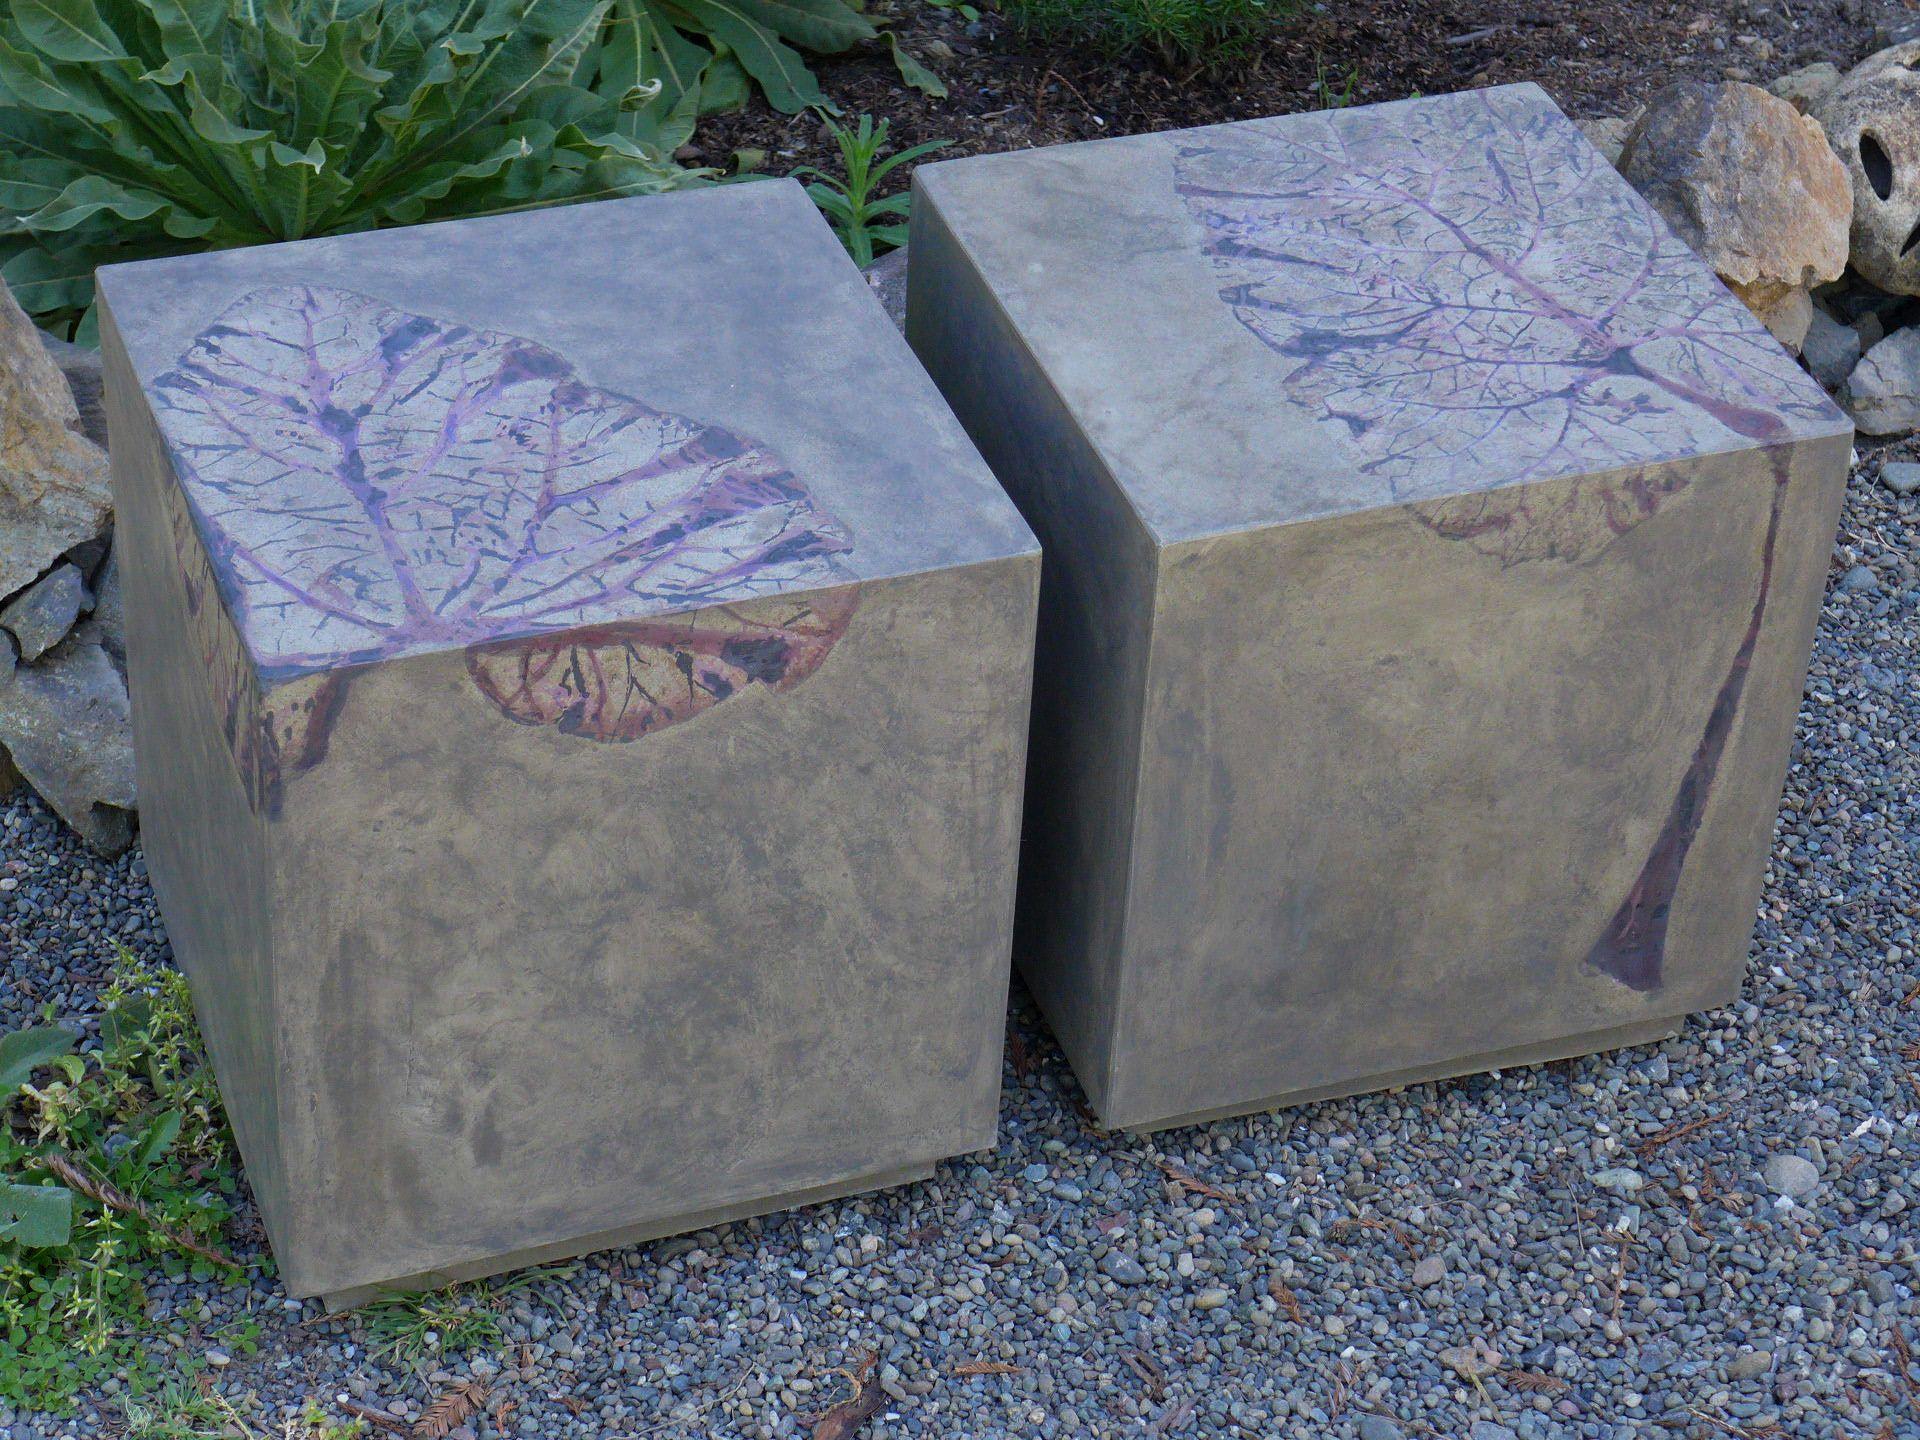 These highly customizable lightweight concrete square side, end or coffee tables with leaf impressions from real leaves can add a solid presence to nearly any room or outdoor environment. The fossil-like leaf imprints soften the brutalist material